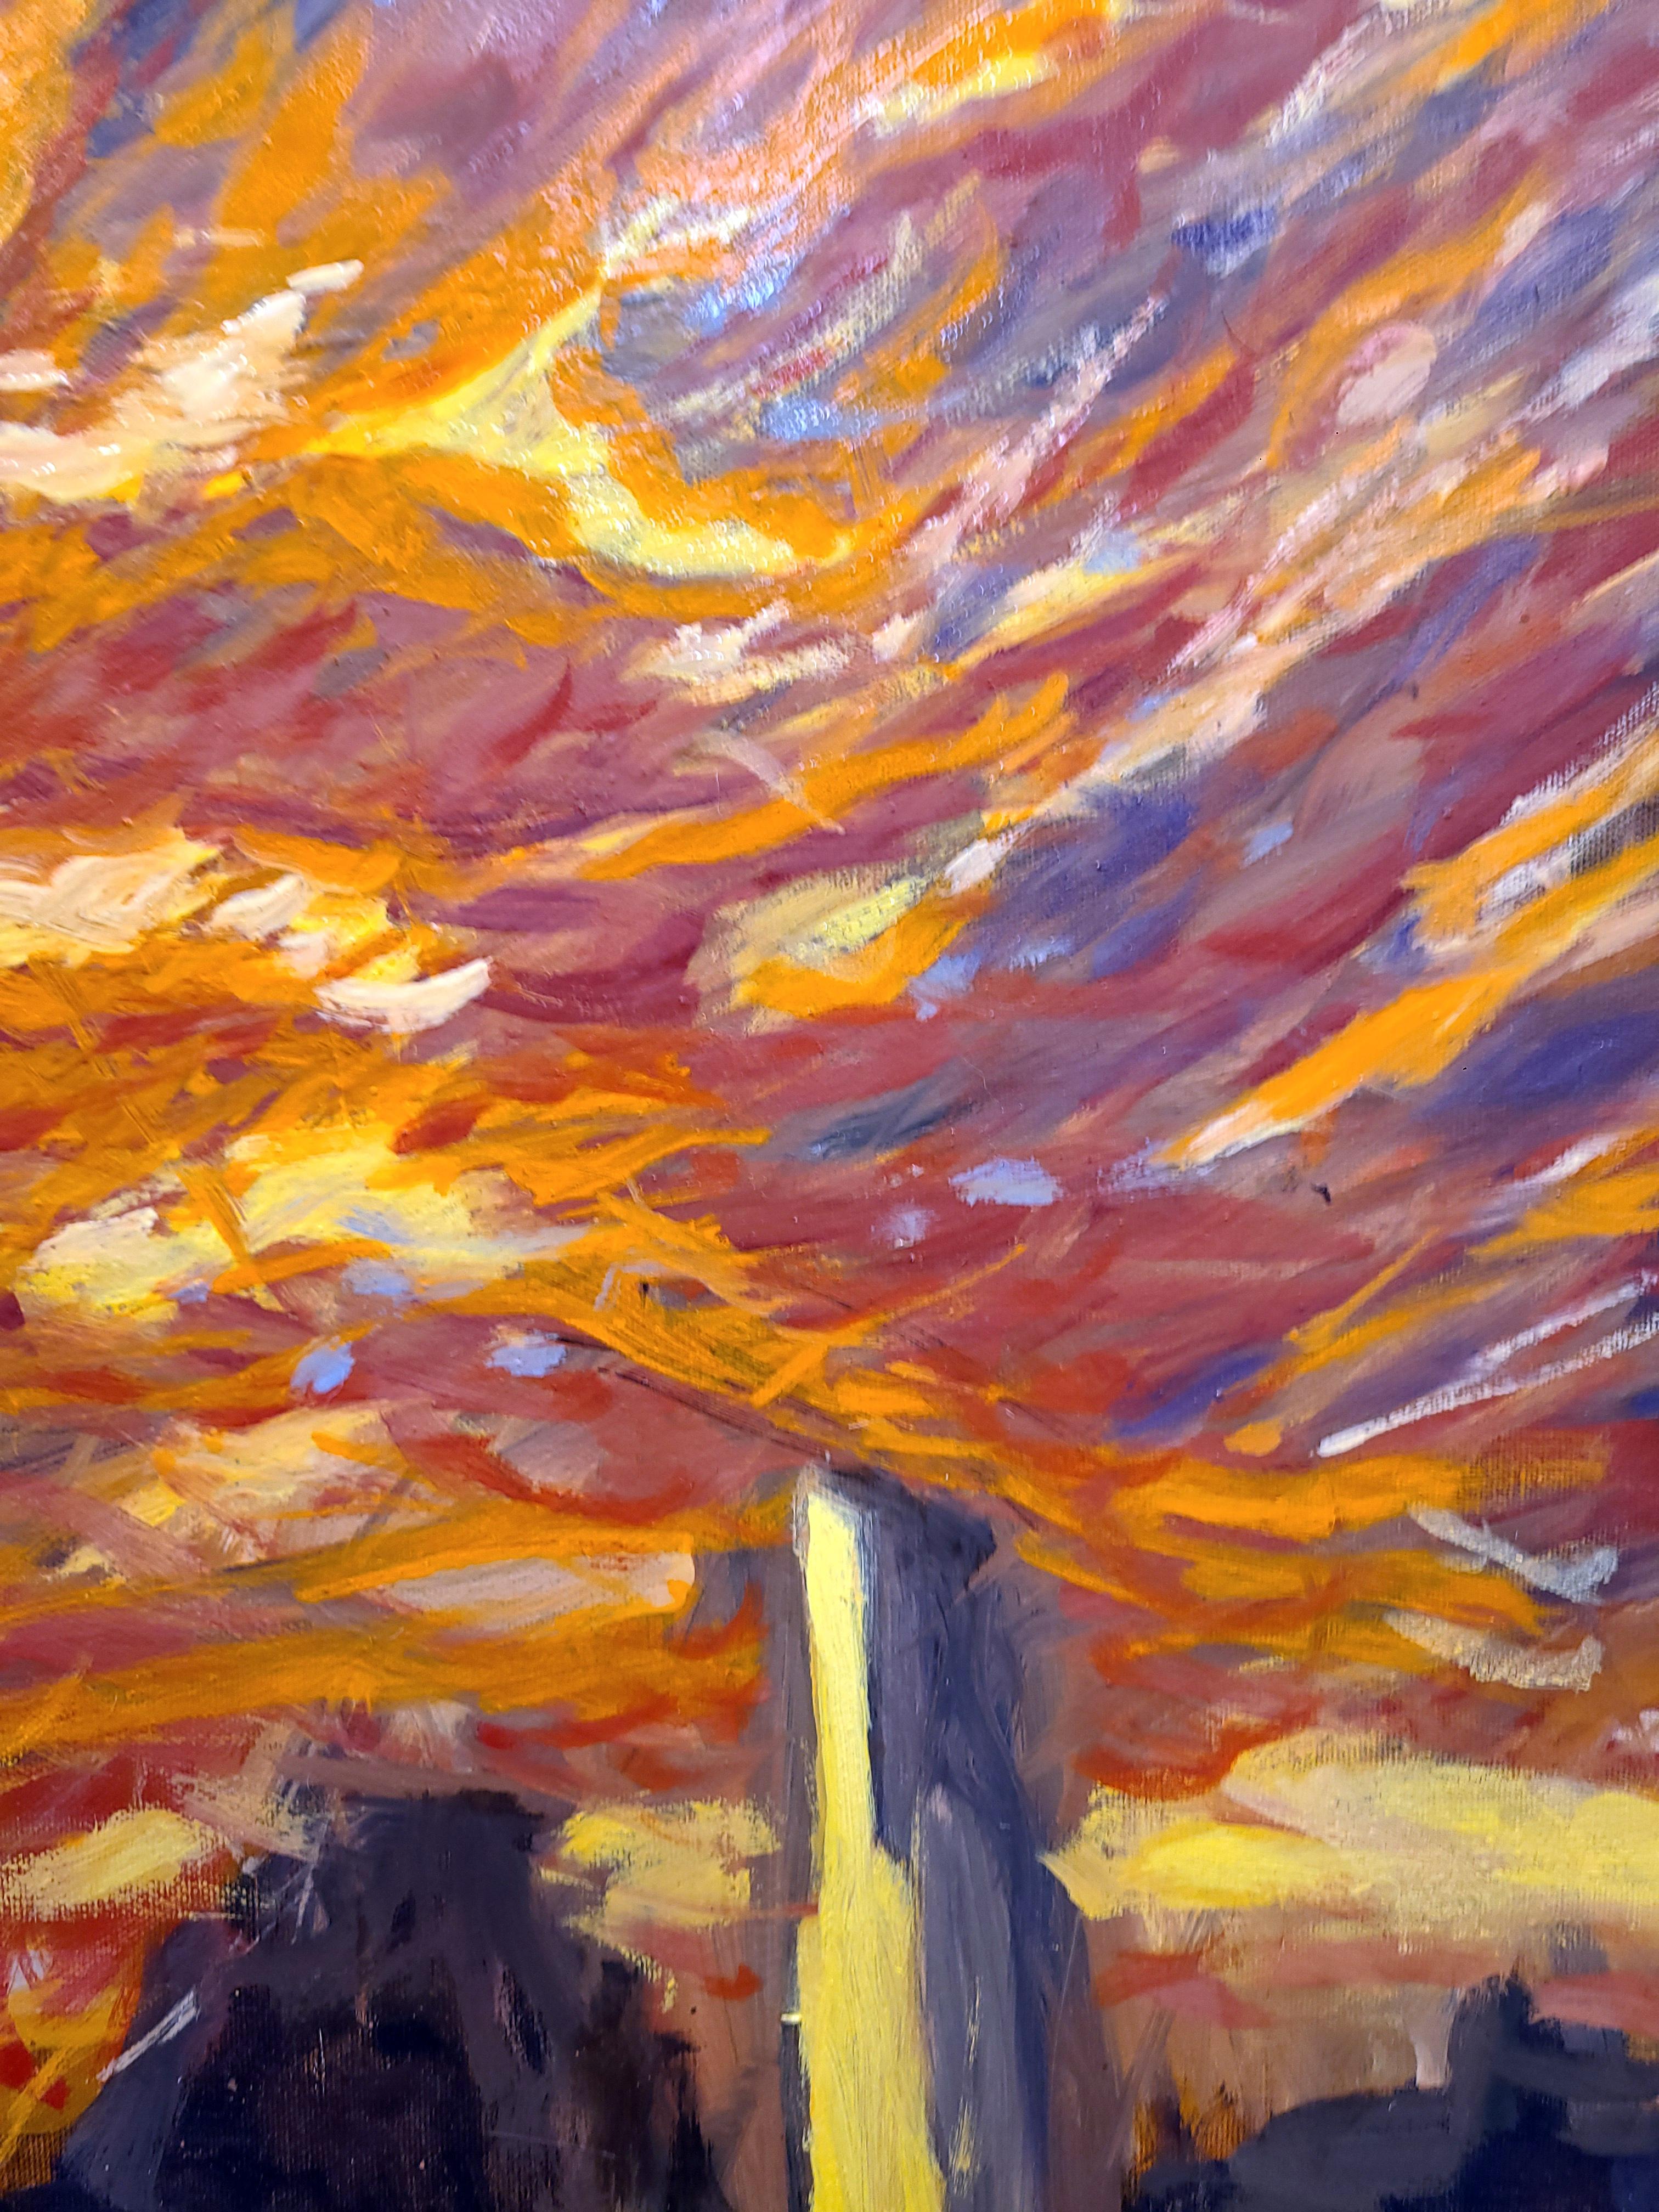 Back in the day, the glorious 1980's was a time of unequaled freedom, that we once took for granted. This picture captures the sky ablaze of a hot summer day - sunset over Downtown Brooklyn painted in genuine natural vermillion and mineral orange.